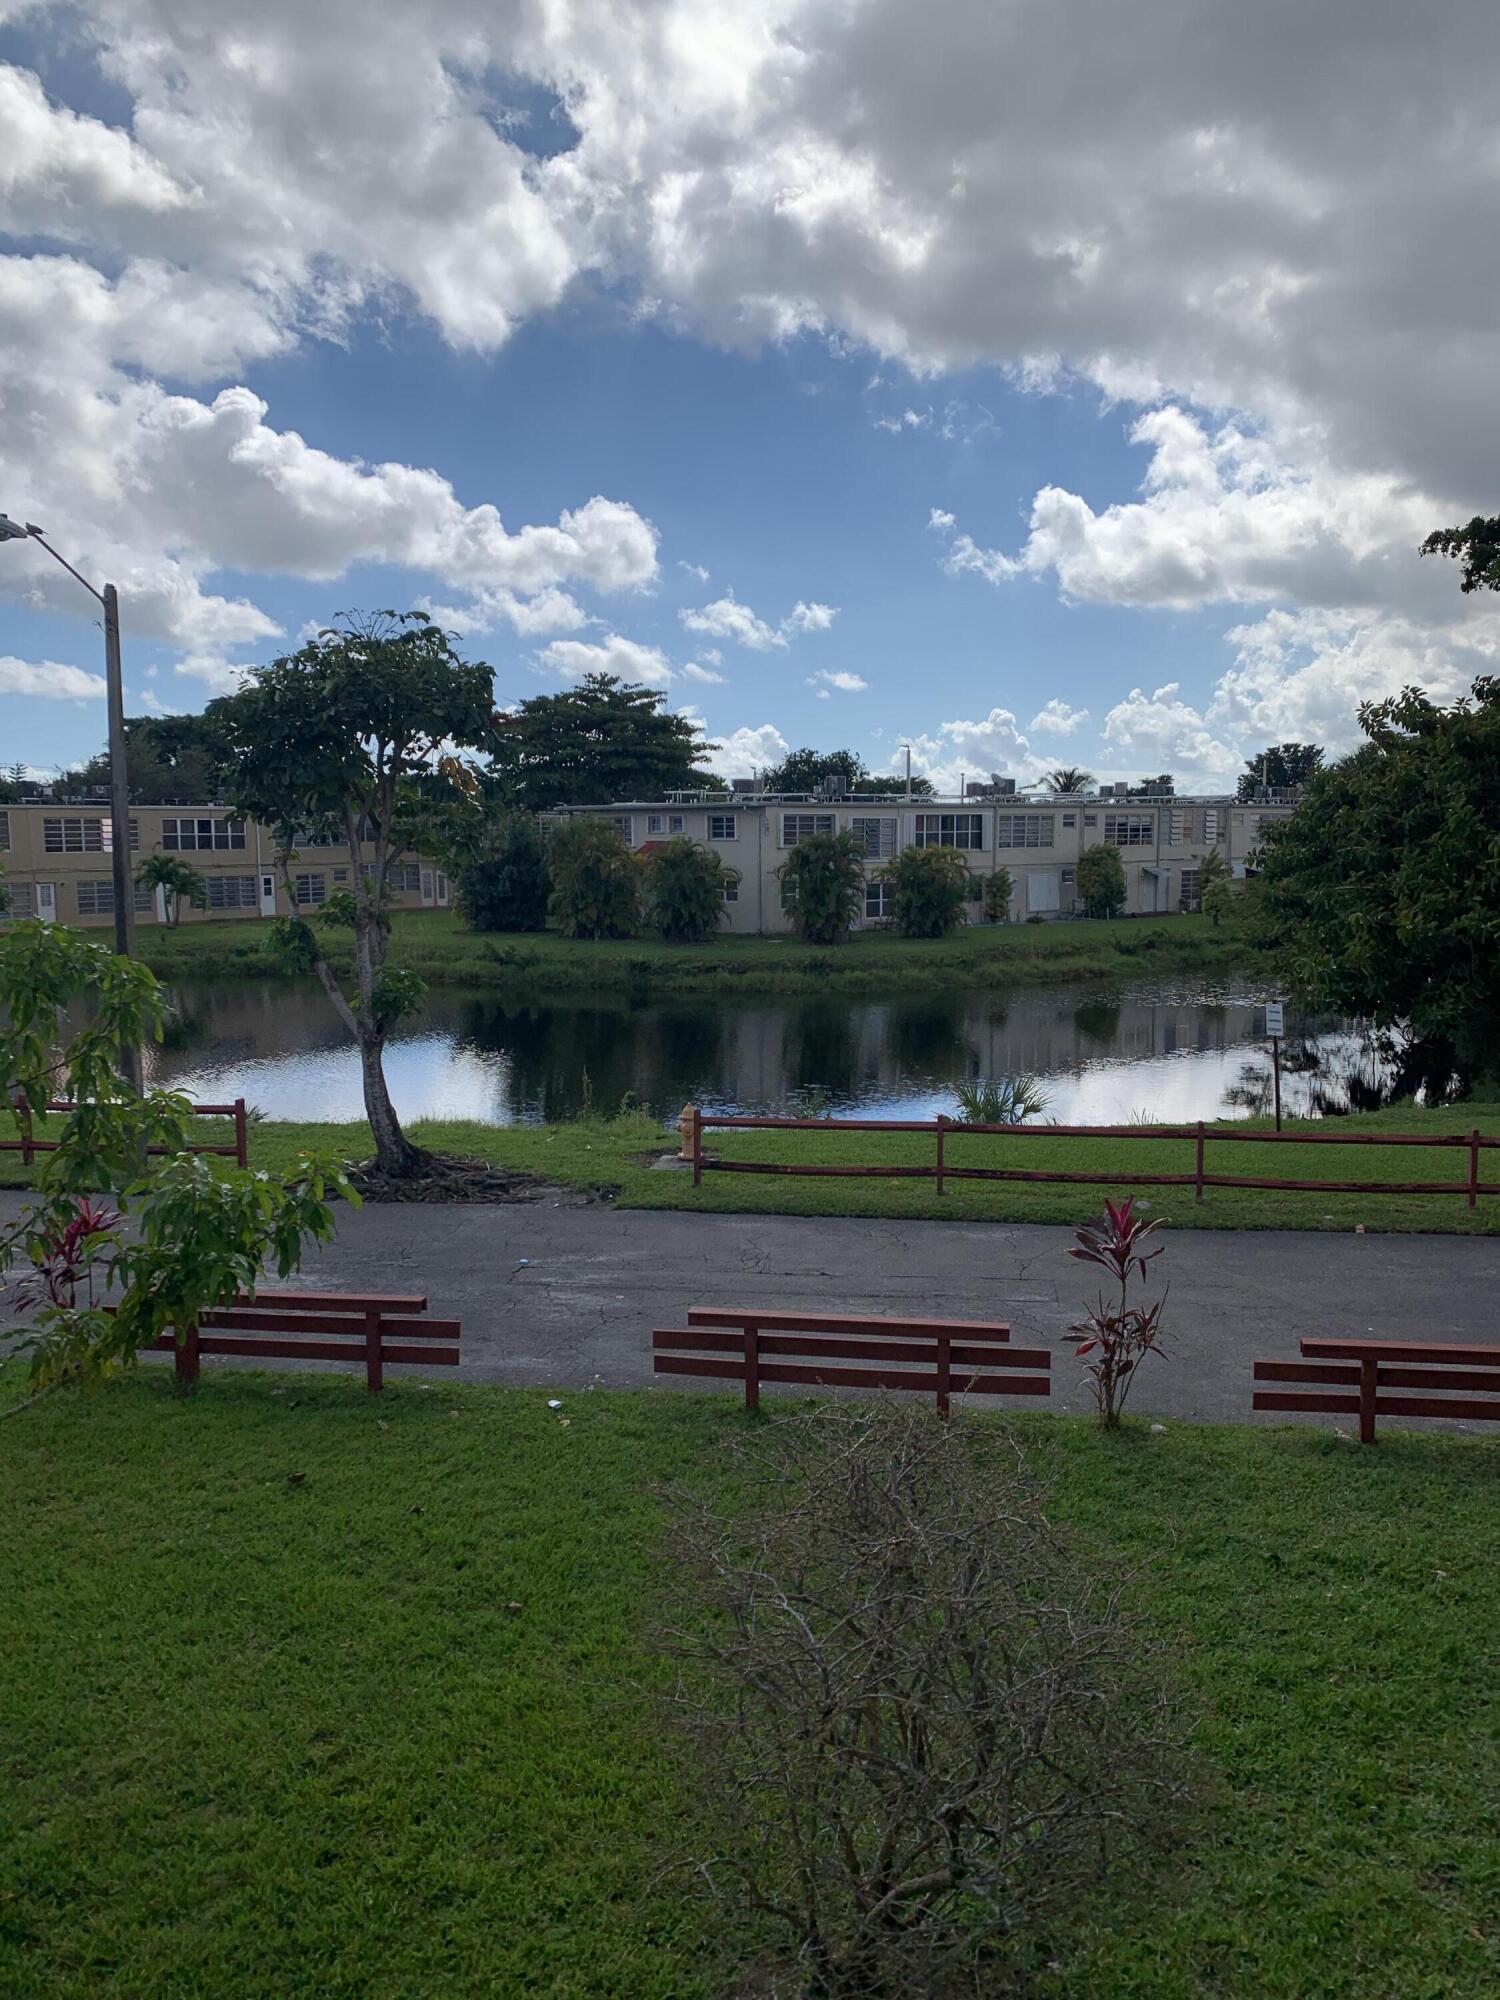 a park view with a bench in a lake